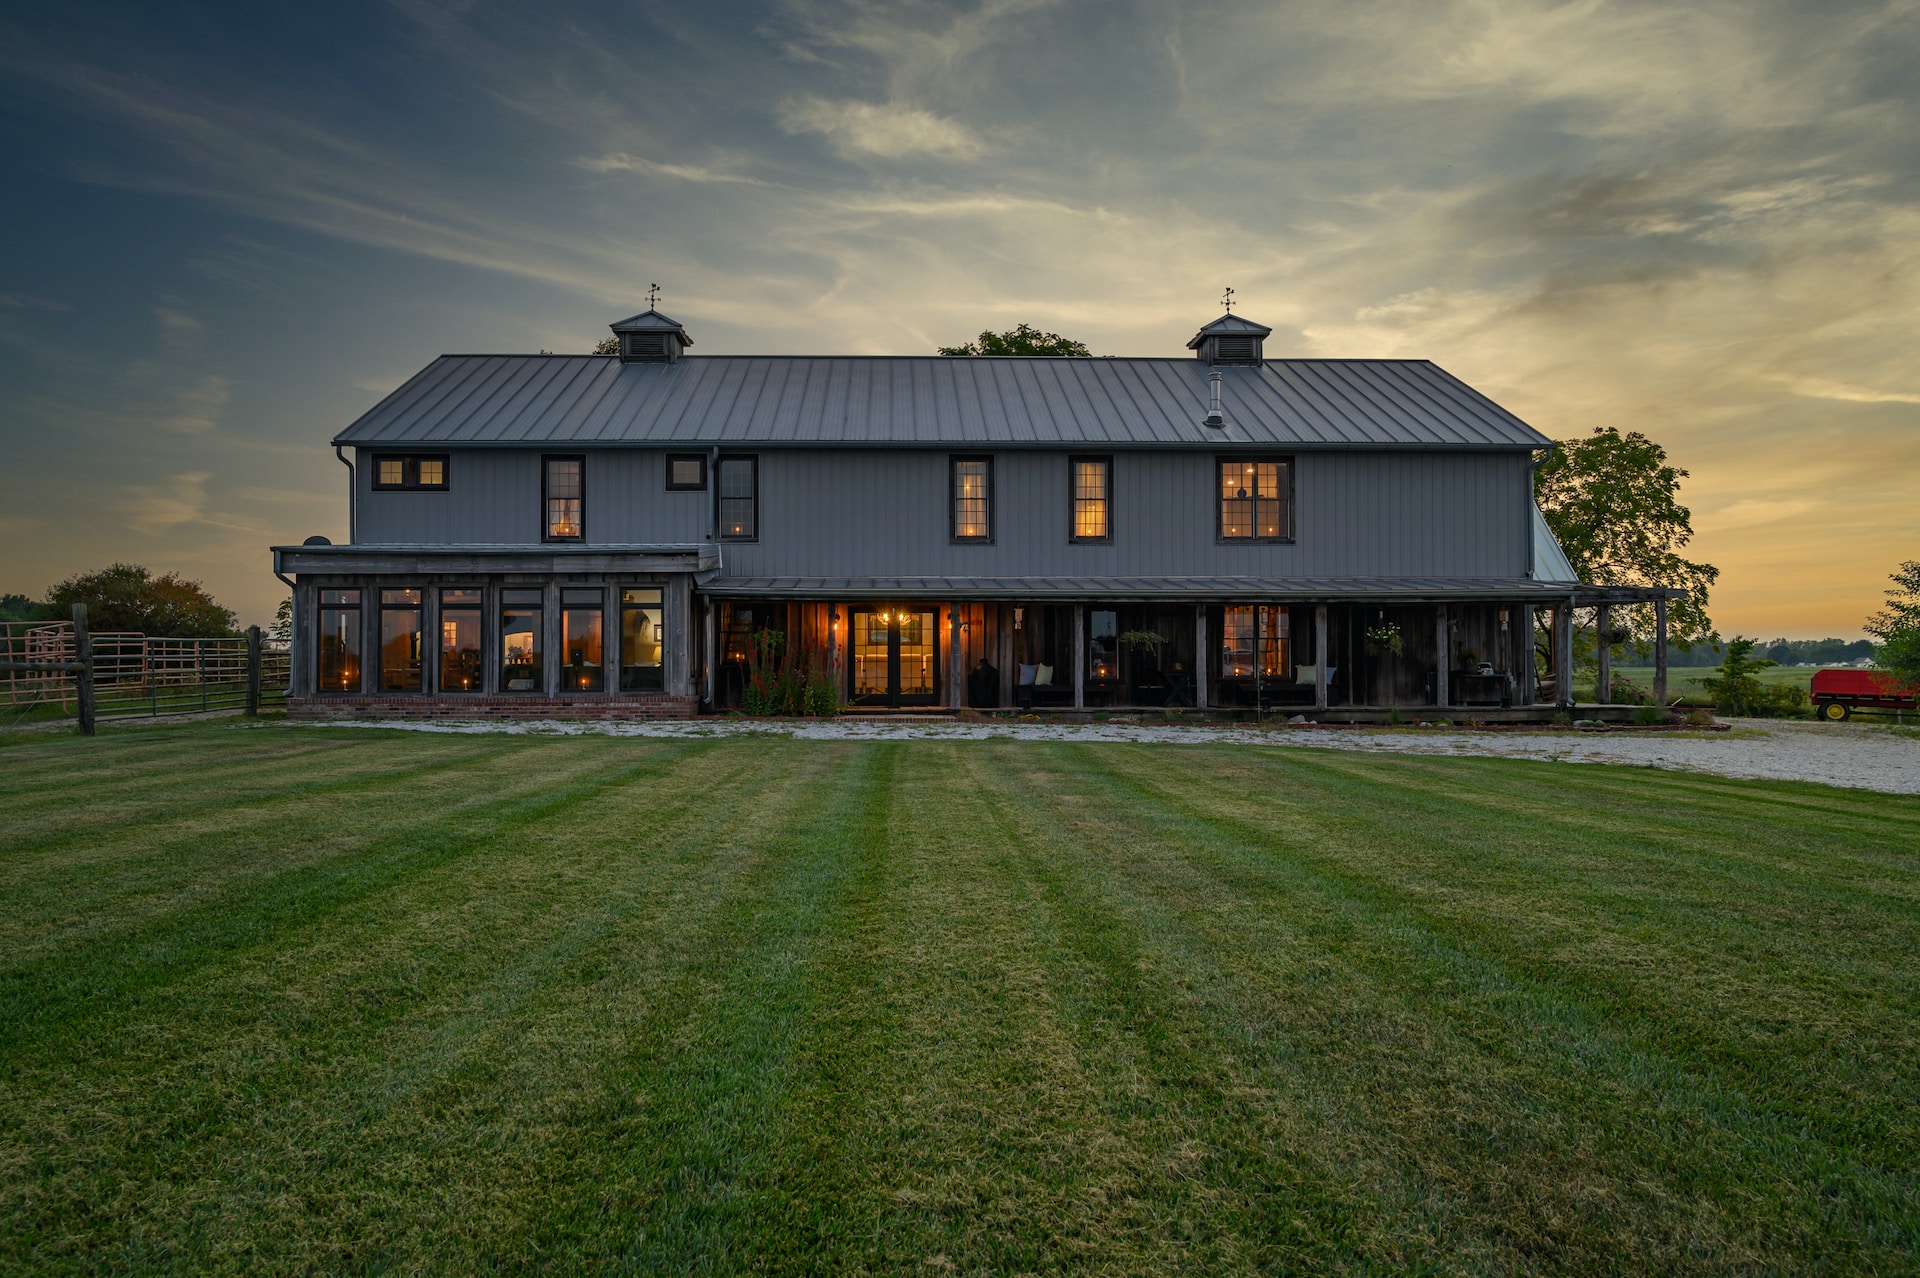 A great example of what a barndominium is. A large grey barn home sitting on lawn with sunset.